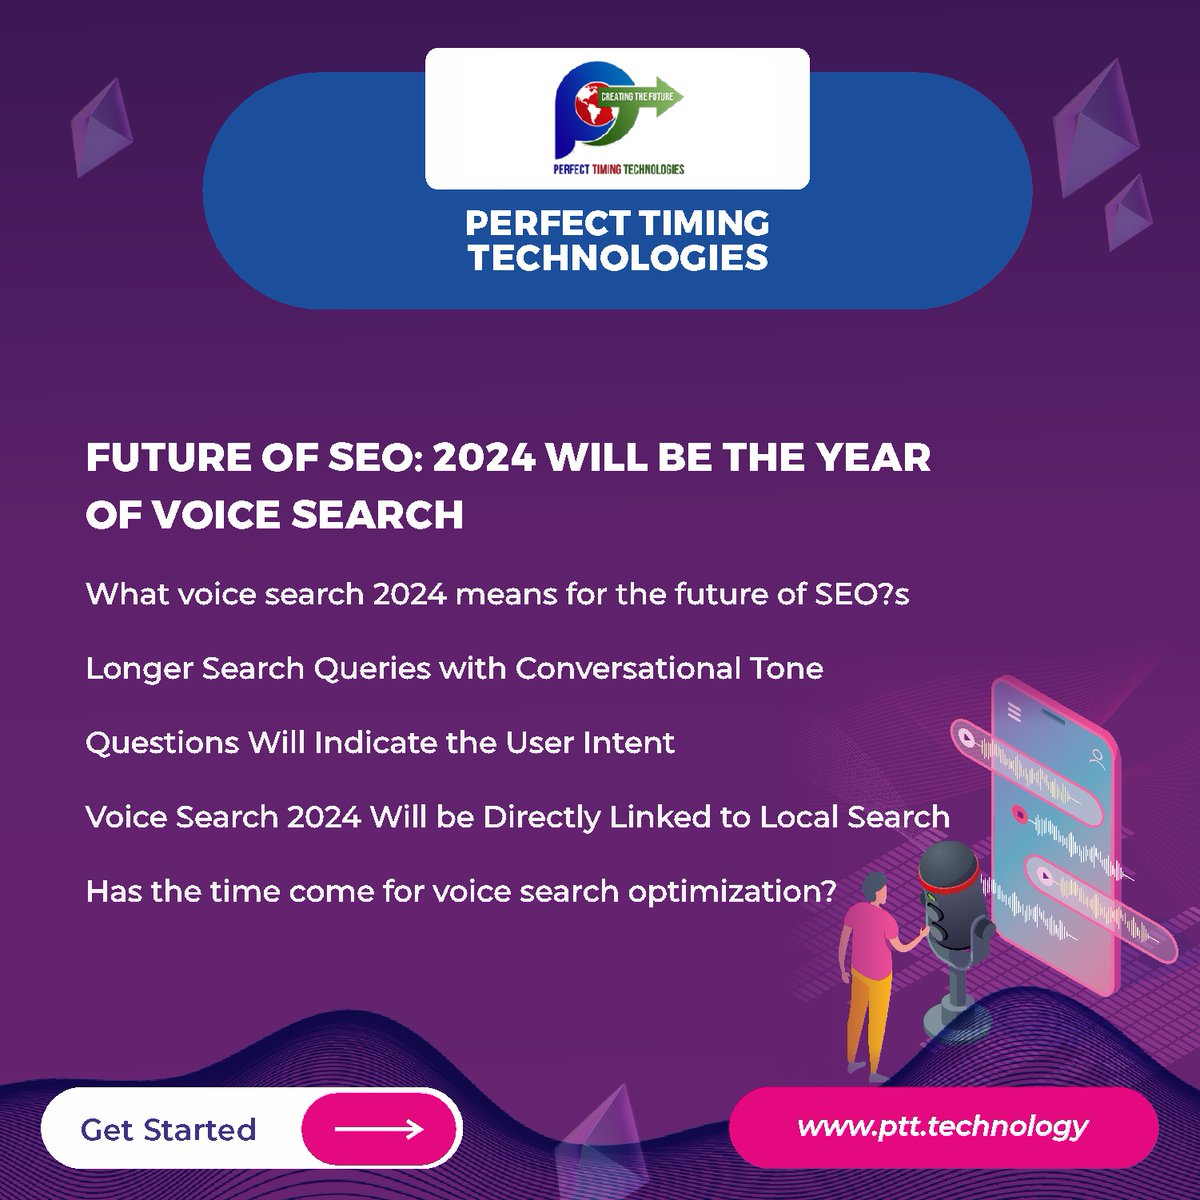 Future of SEO: 2024 will be the Year of Voice Search

Read here: evendigit.com/voice-search-s…

#SEO2024 #FutureofSEO #SearchEngineOptimization #DigitalMarketing #SEOTrends #VoiceSearchTechnology #PerfectTimingHolding #PerfectTimingTechnologies